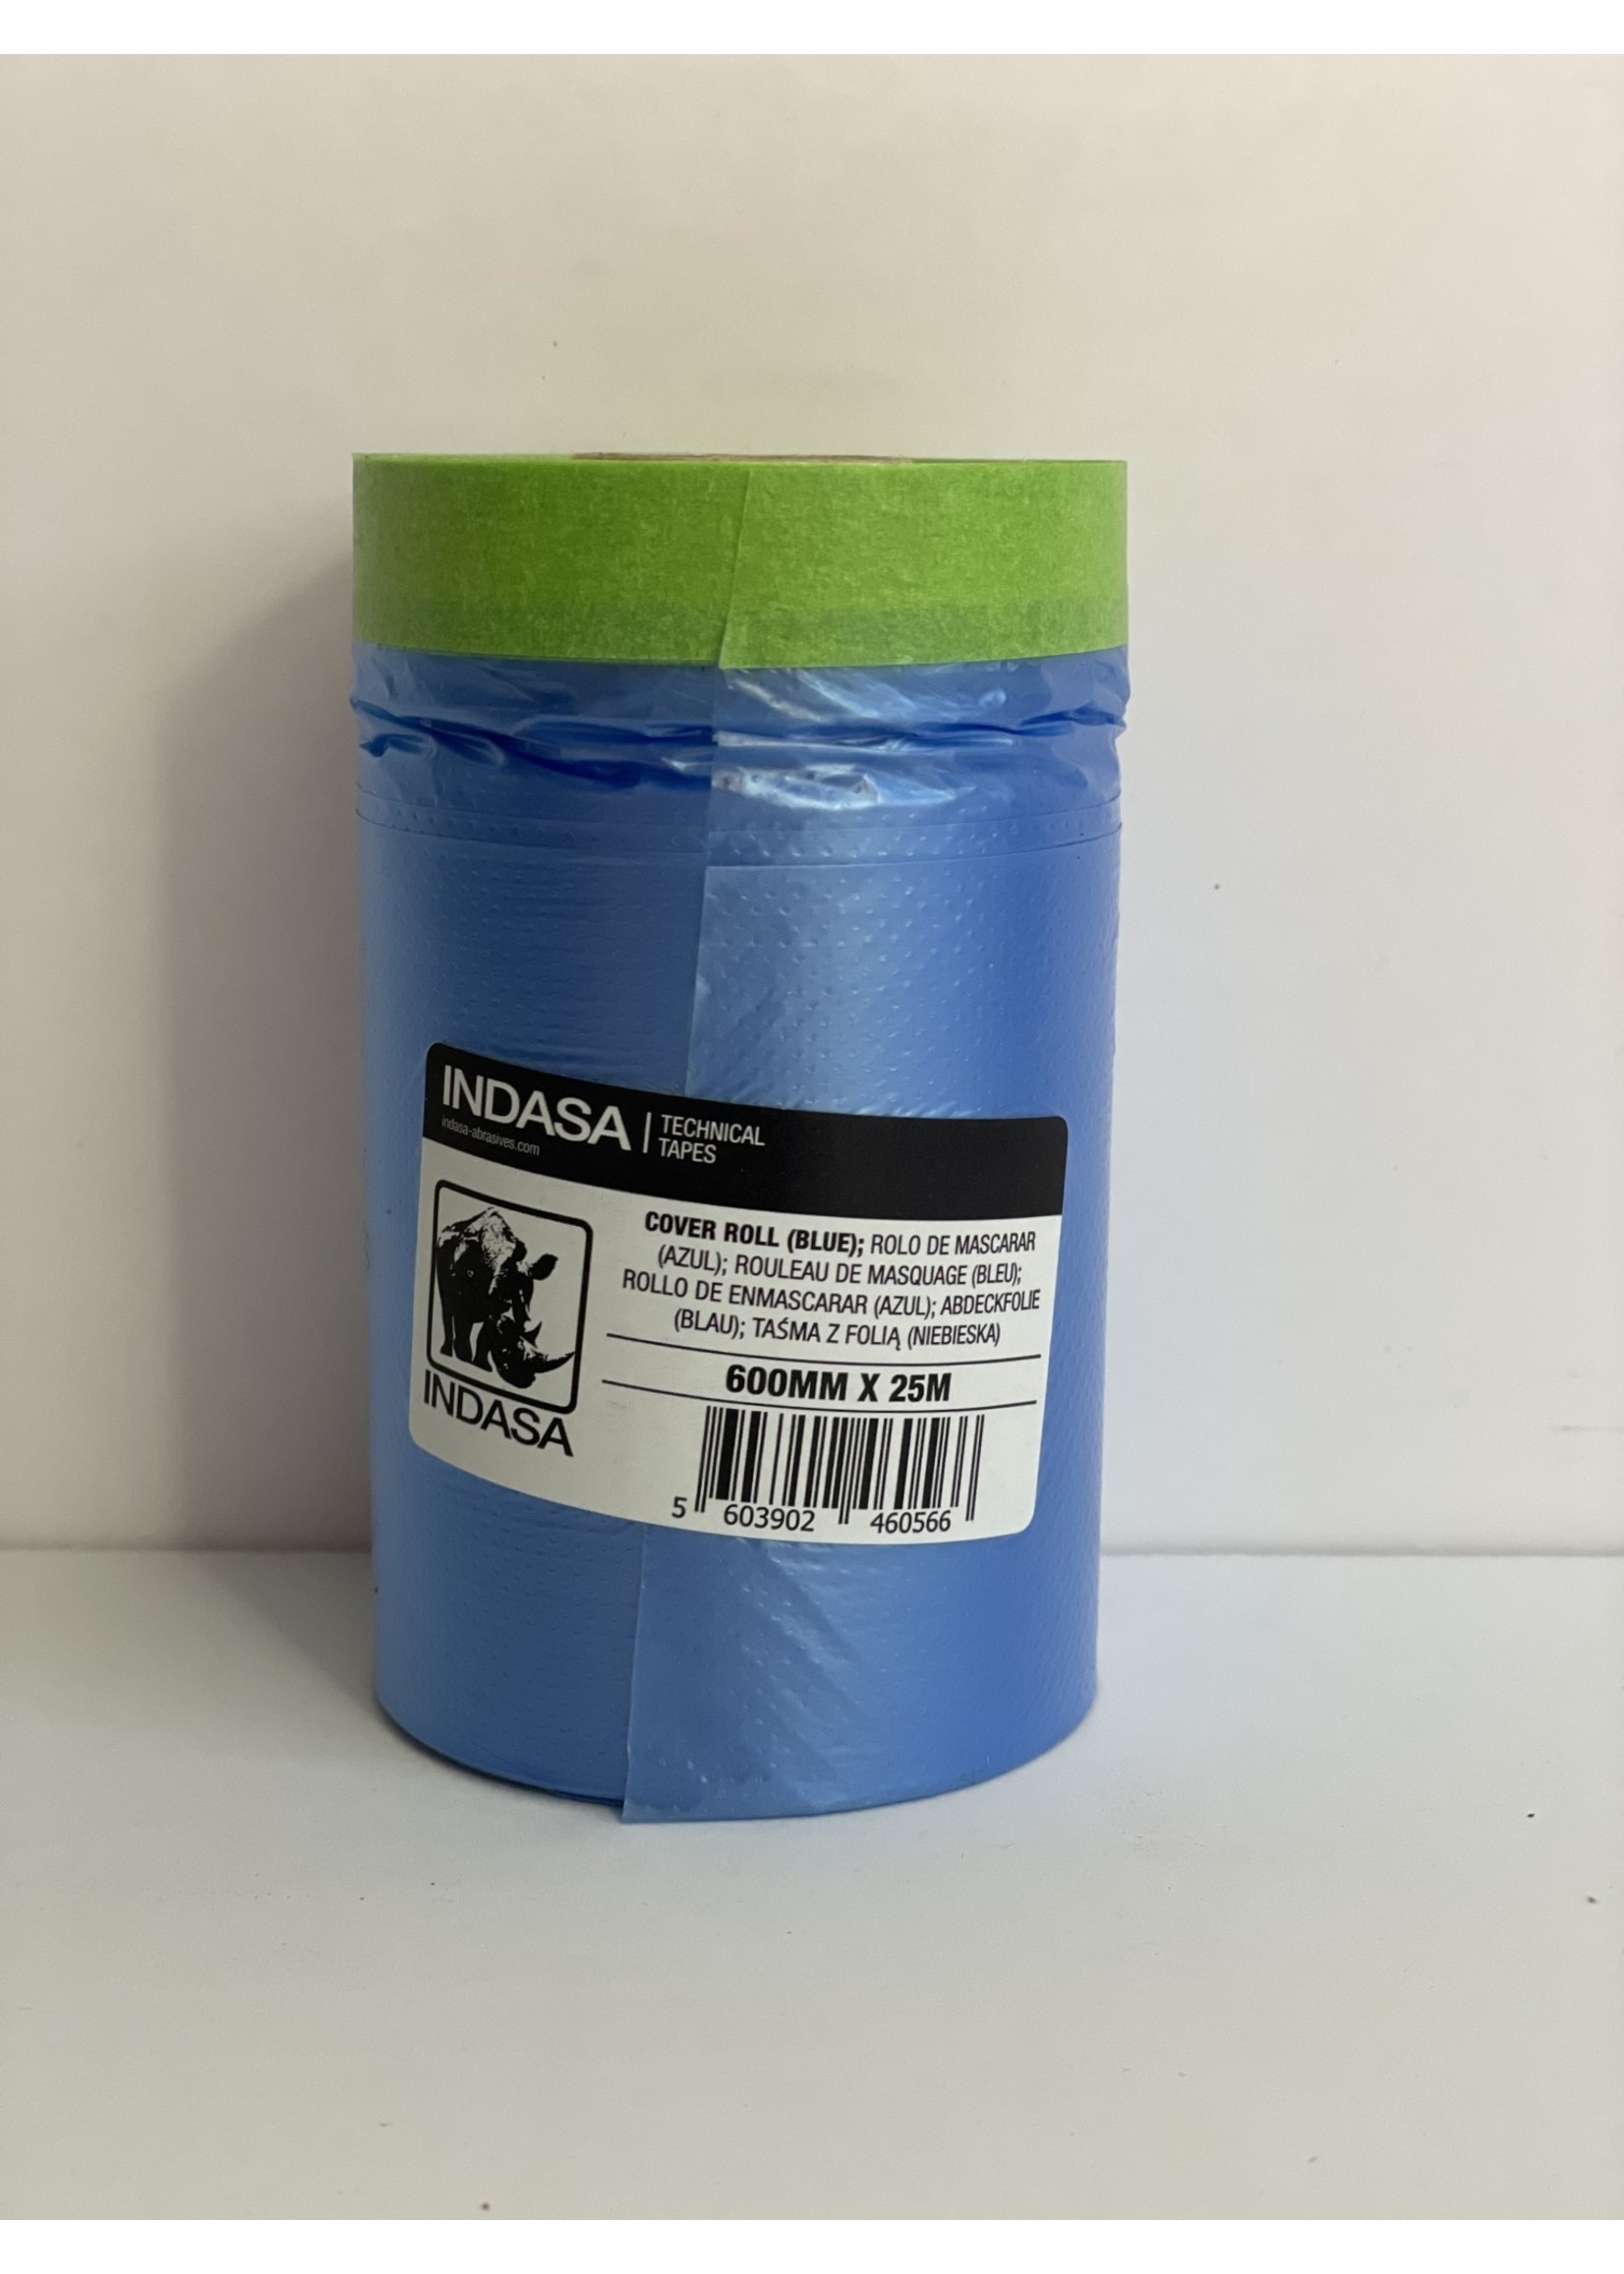 IND Pre-Taped Masking Rolls - 25m